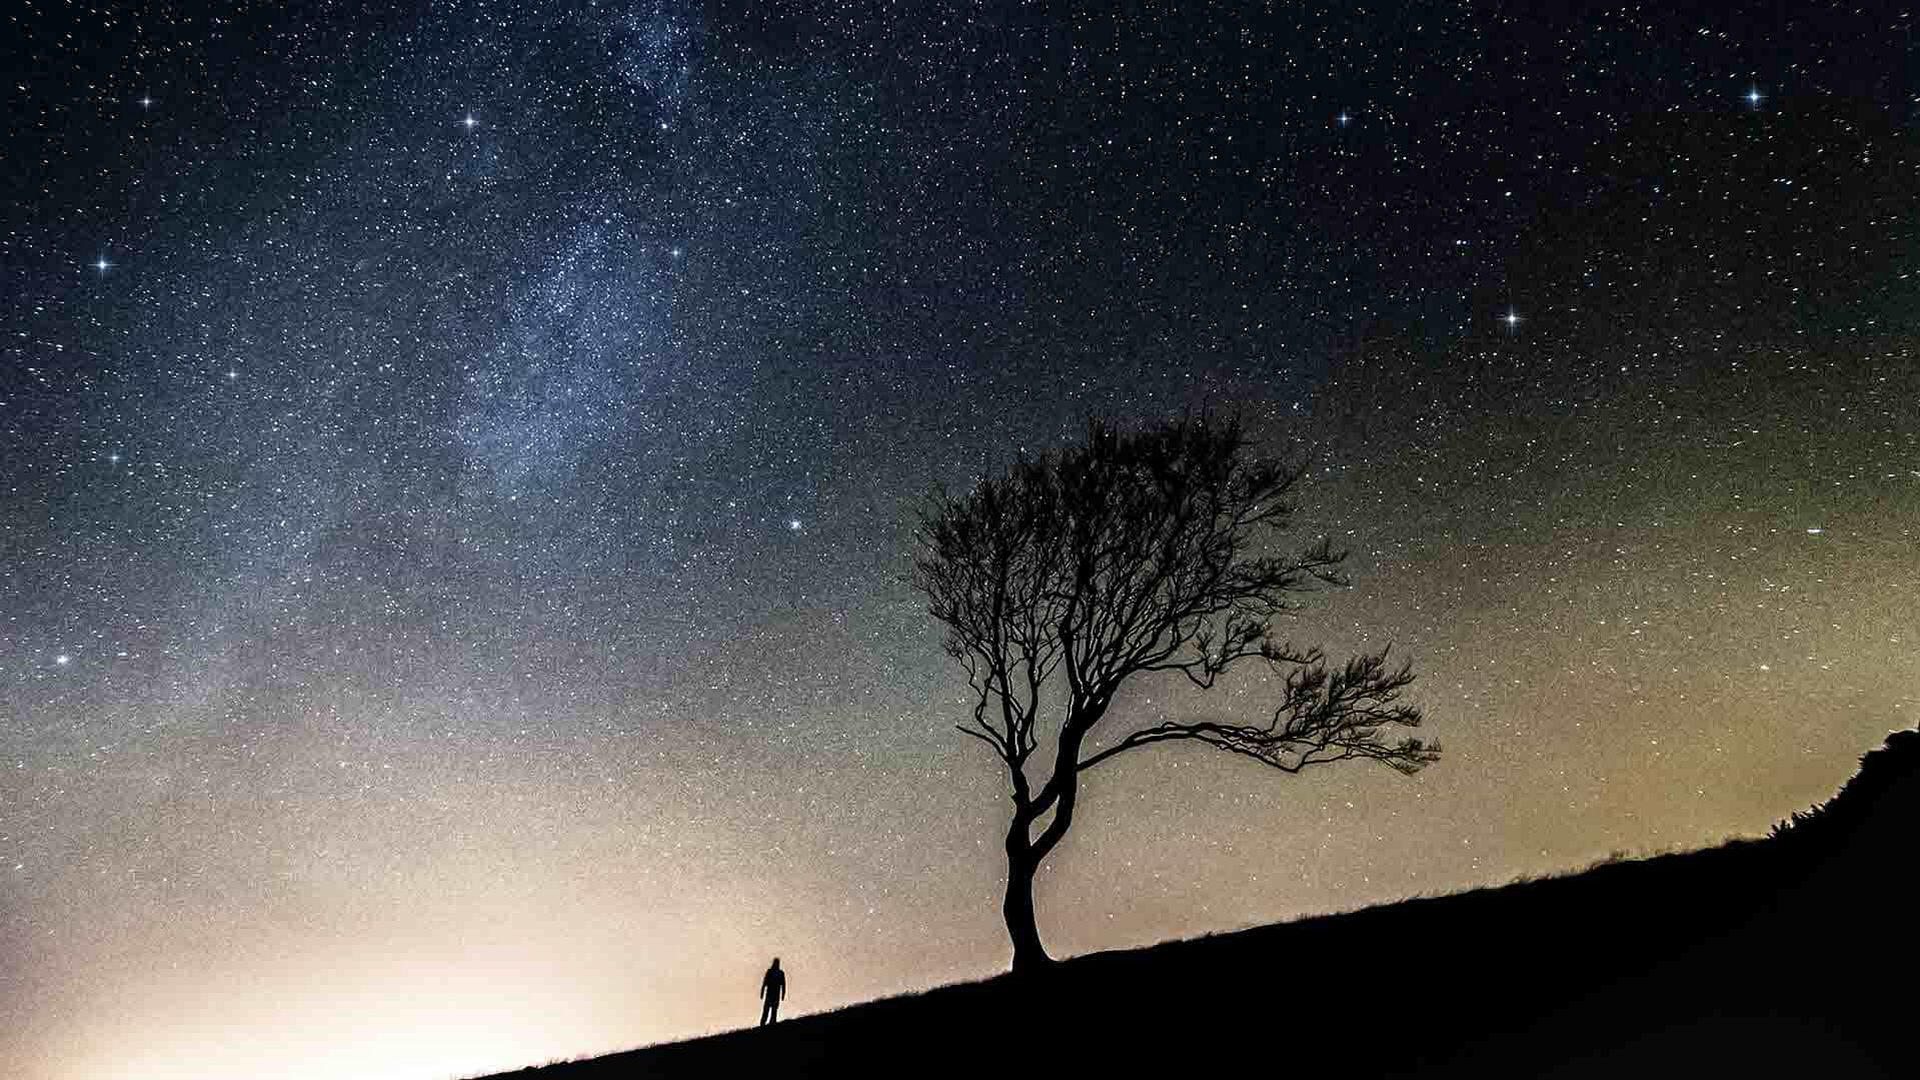 Stargazing Suggestions for This Week